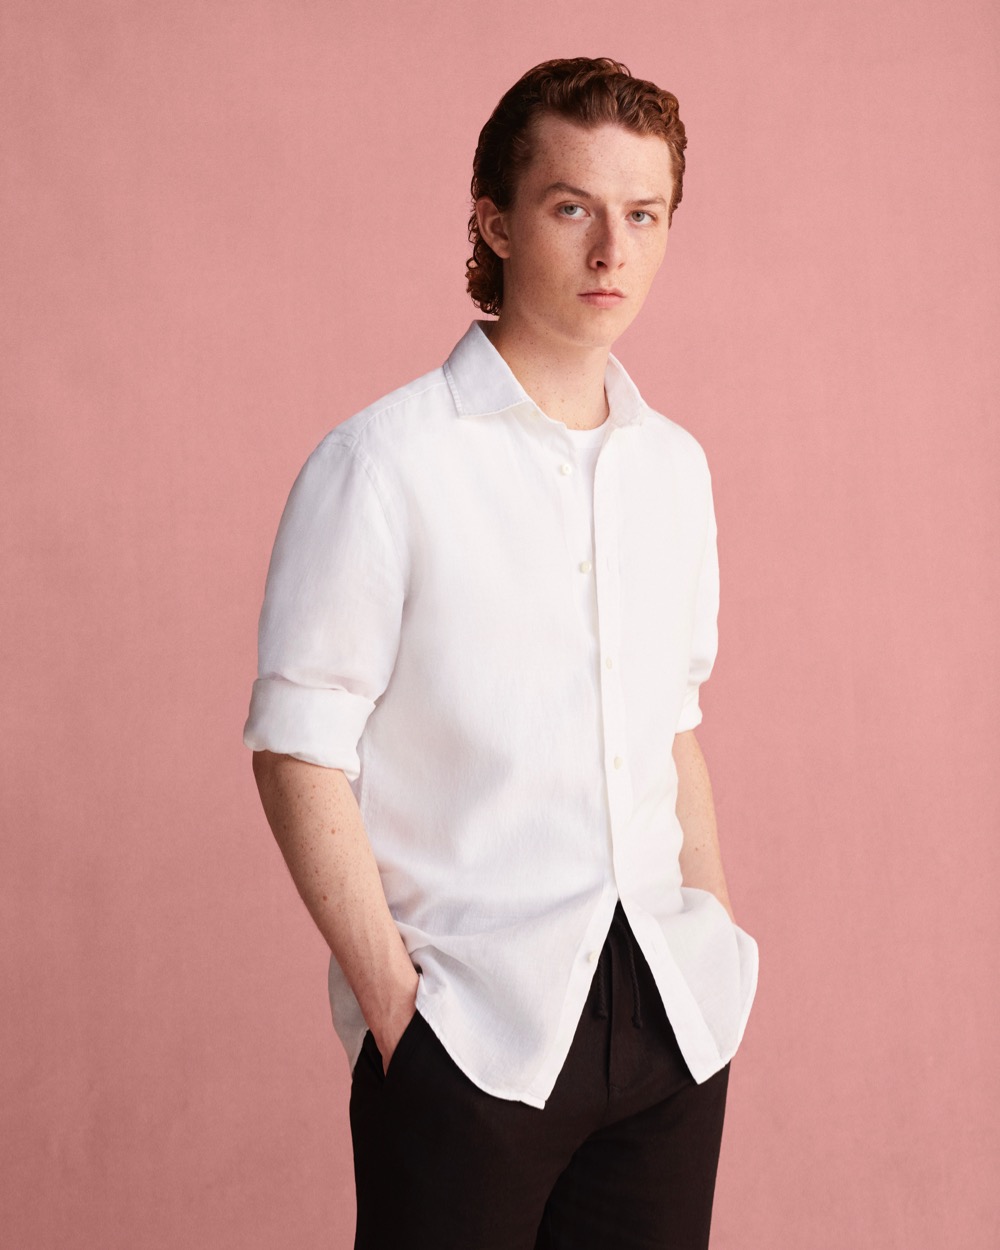 Thomas Pink “When is a white shirt pink?” – Show Media London